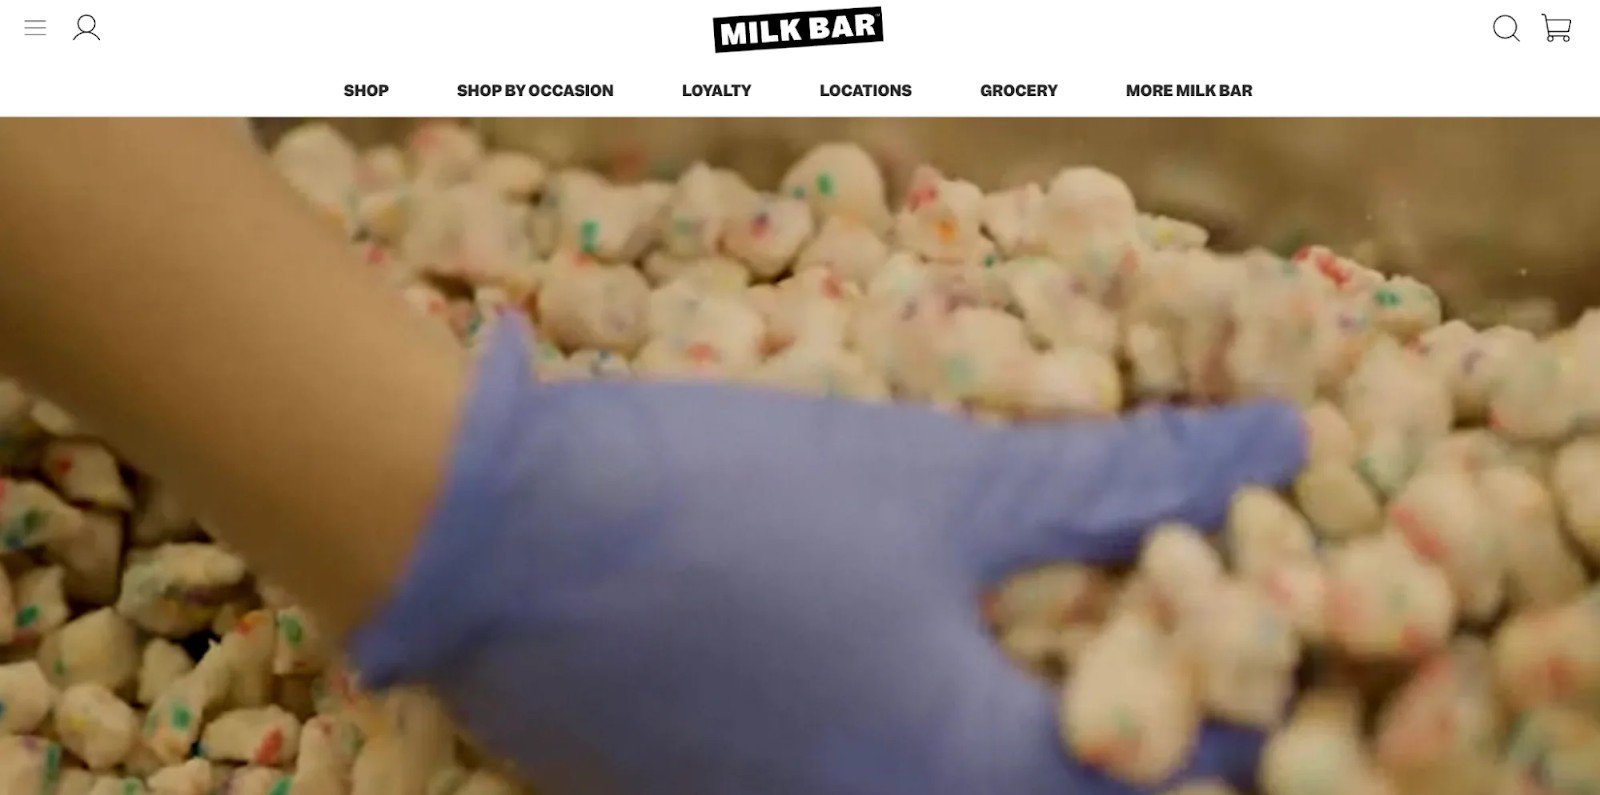 About Us Page Examples: Milk Bar